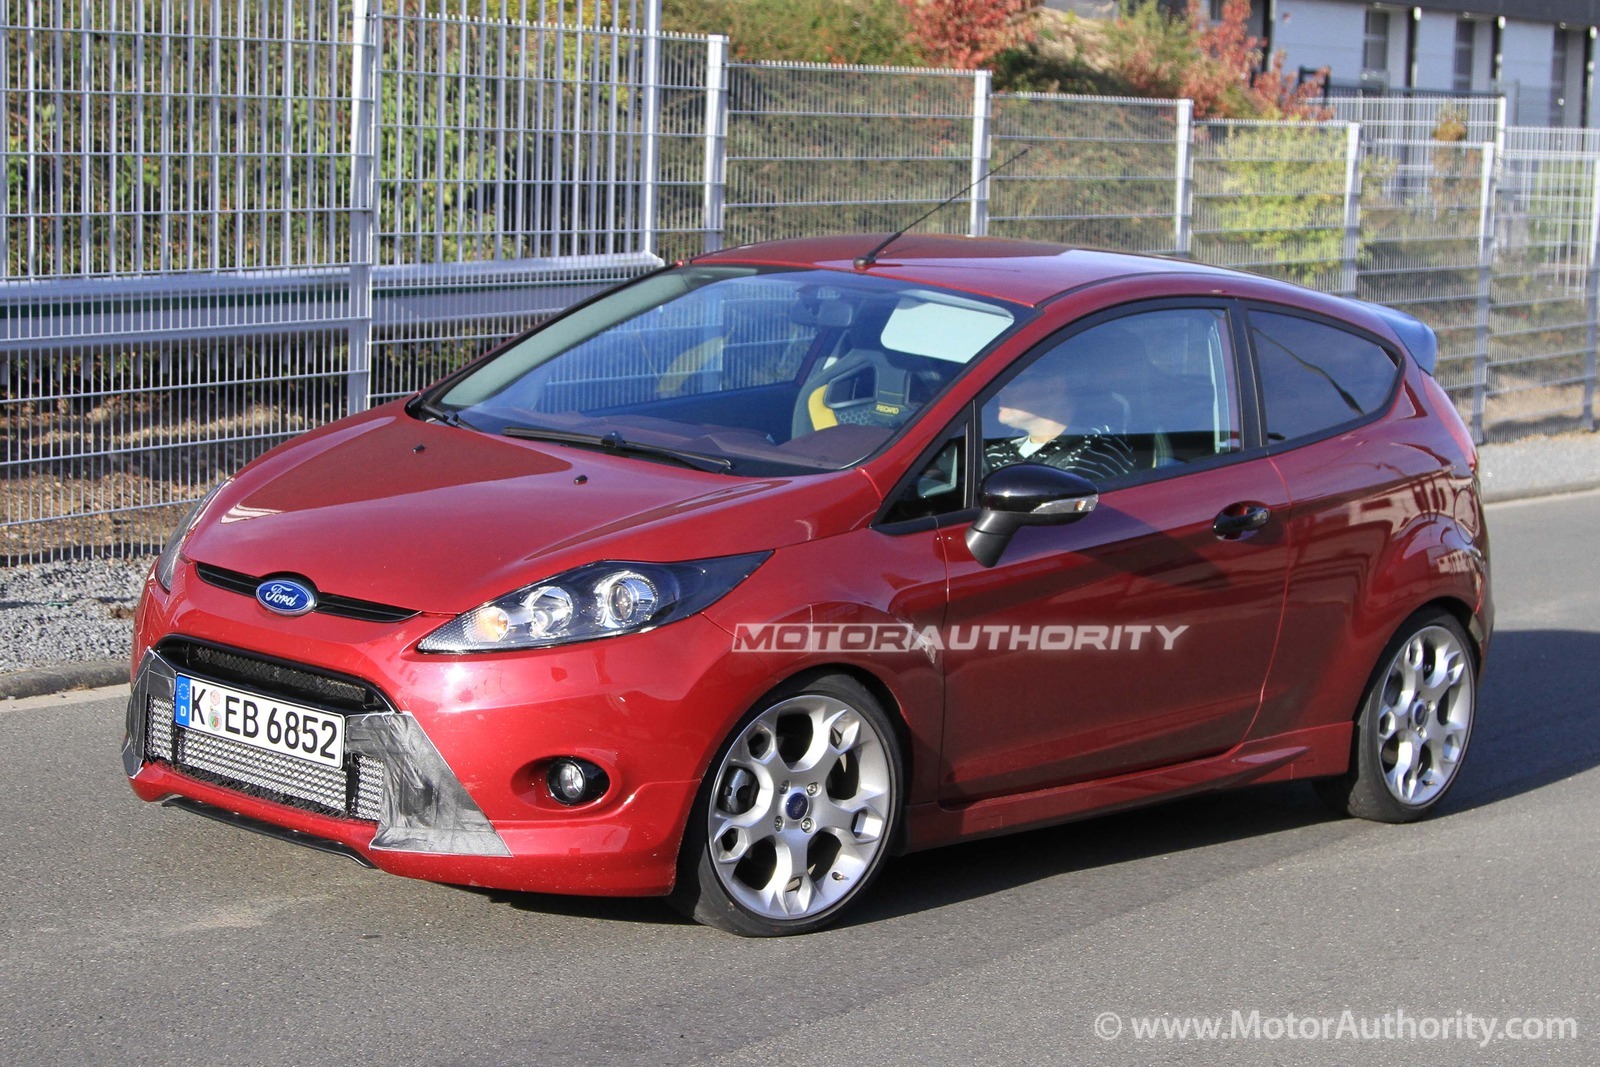 Uitreiken Ananiver Accor 2013 Ford Fiesta ST To Pack 180-HP EcoBoost Engine?